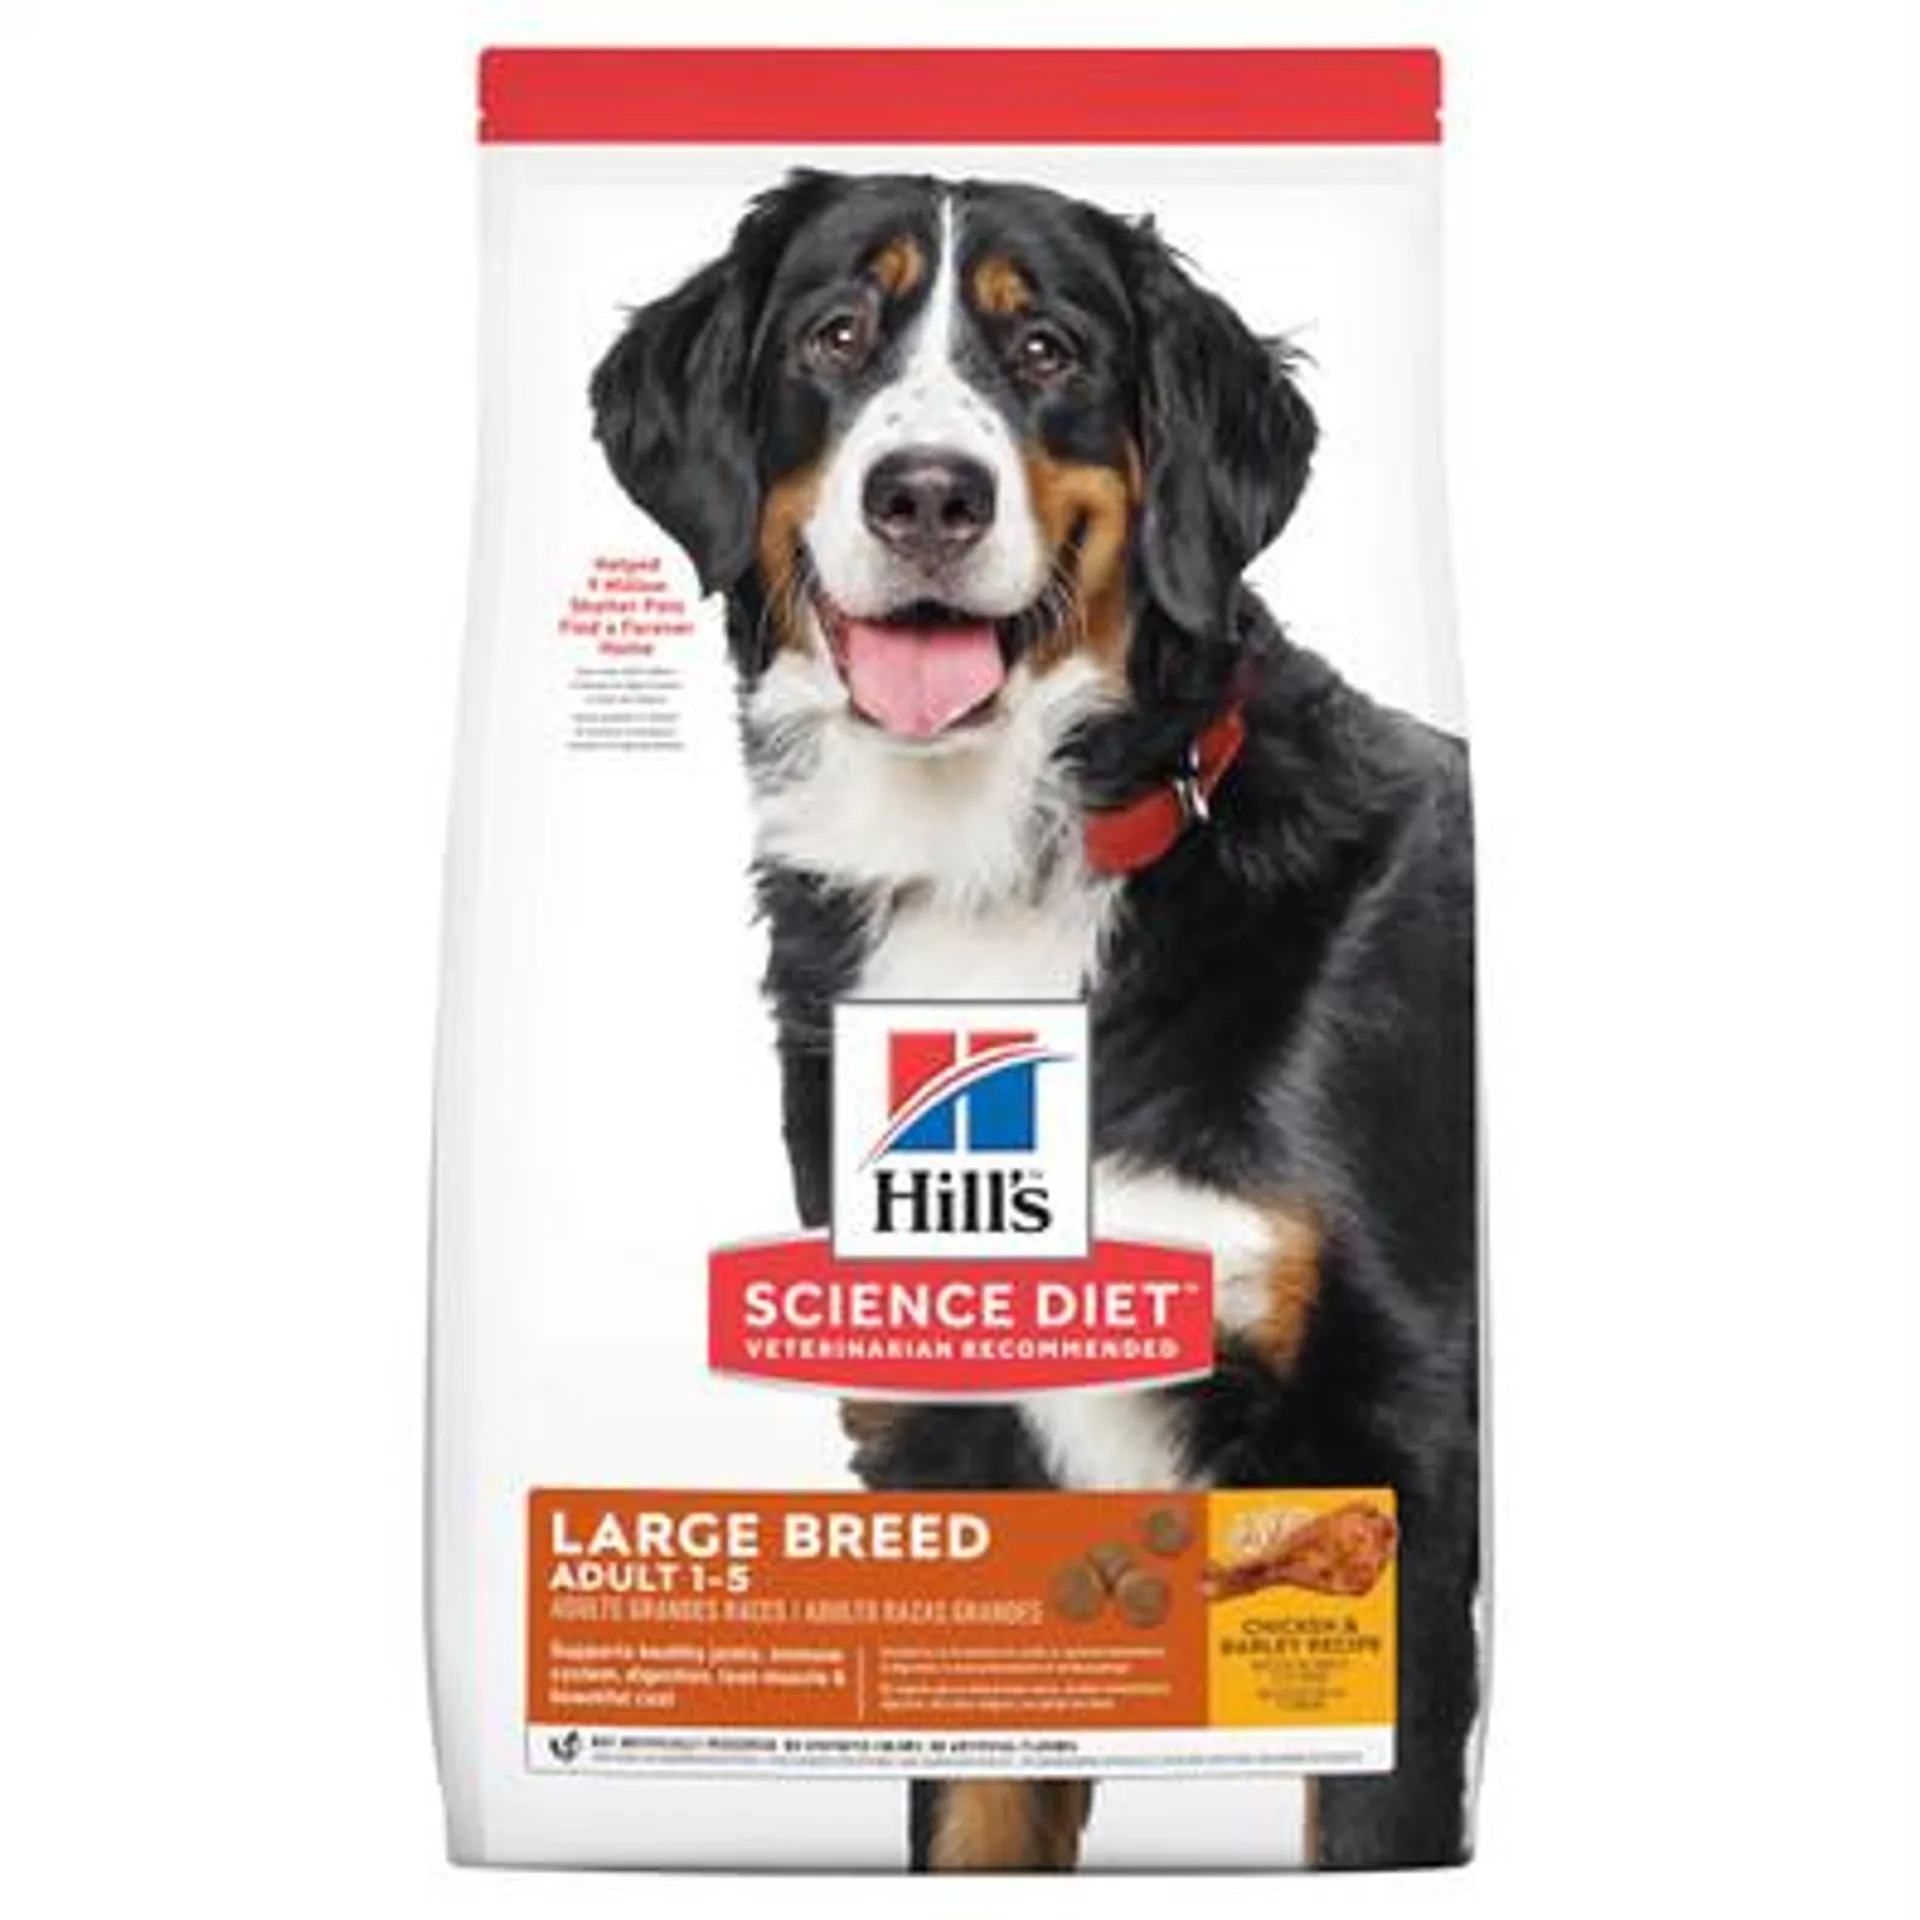 Hill's Science Diet Large Breed Adult Dry Dog Food